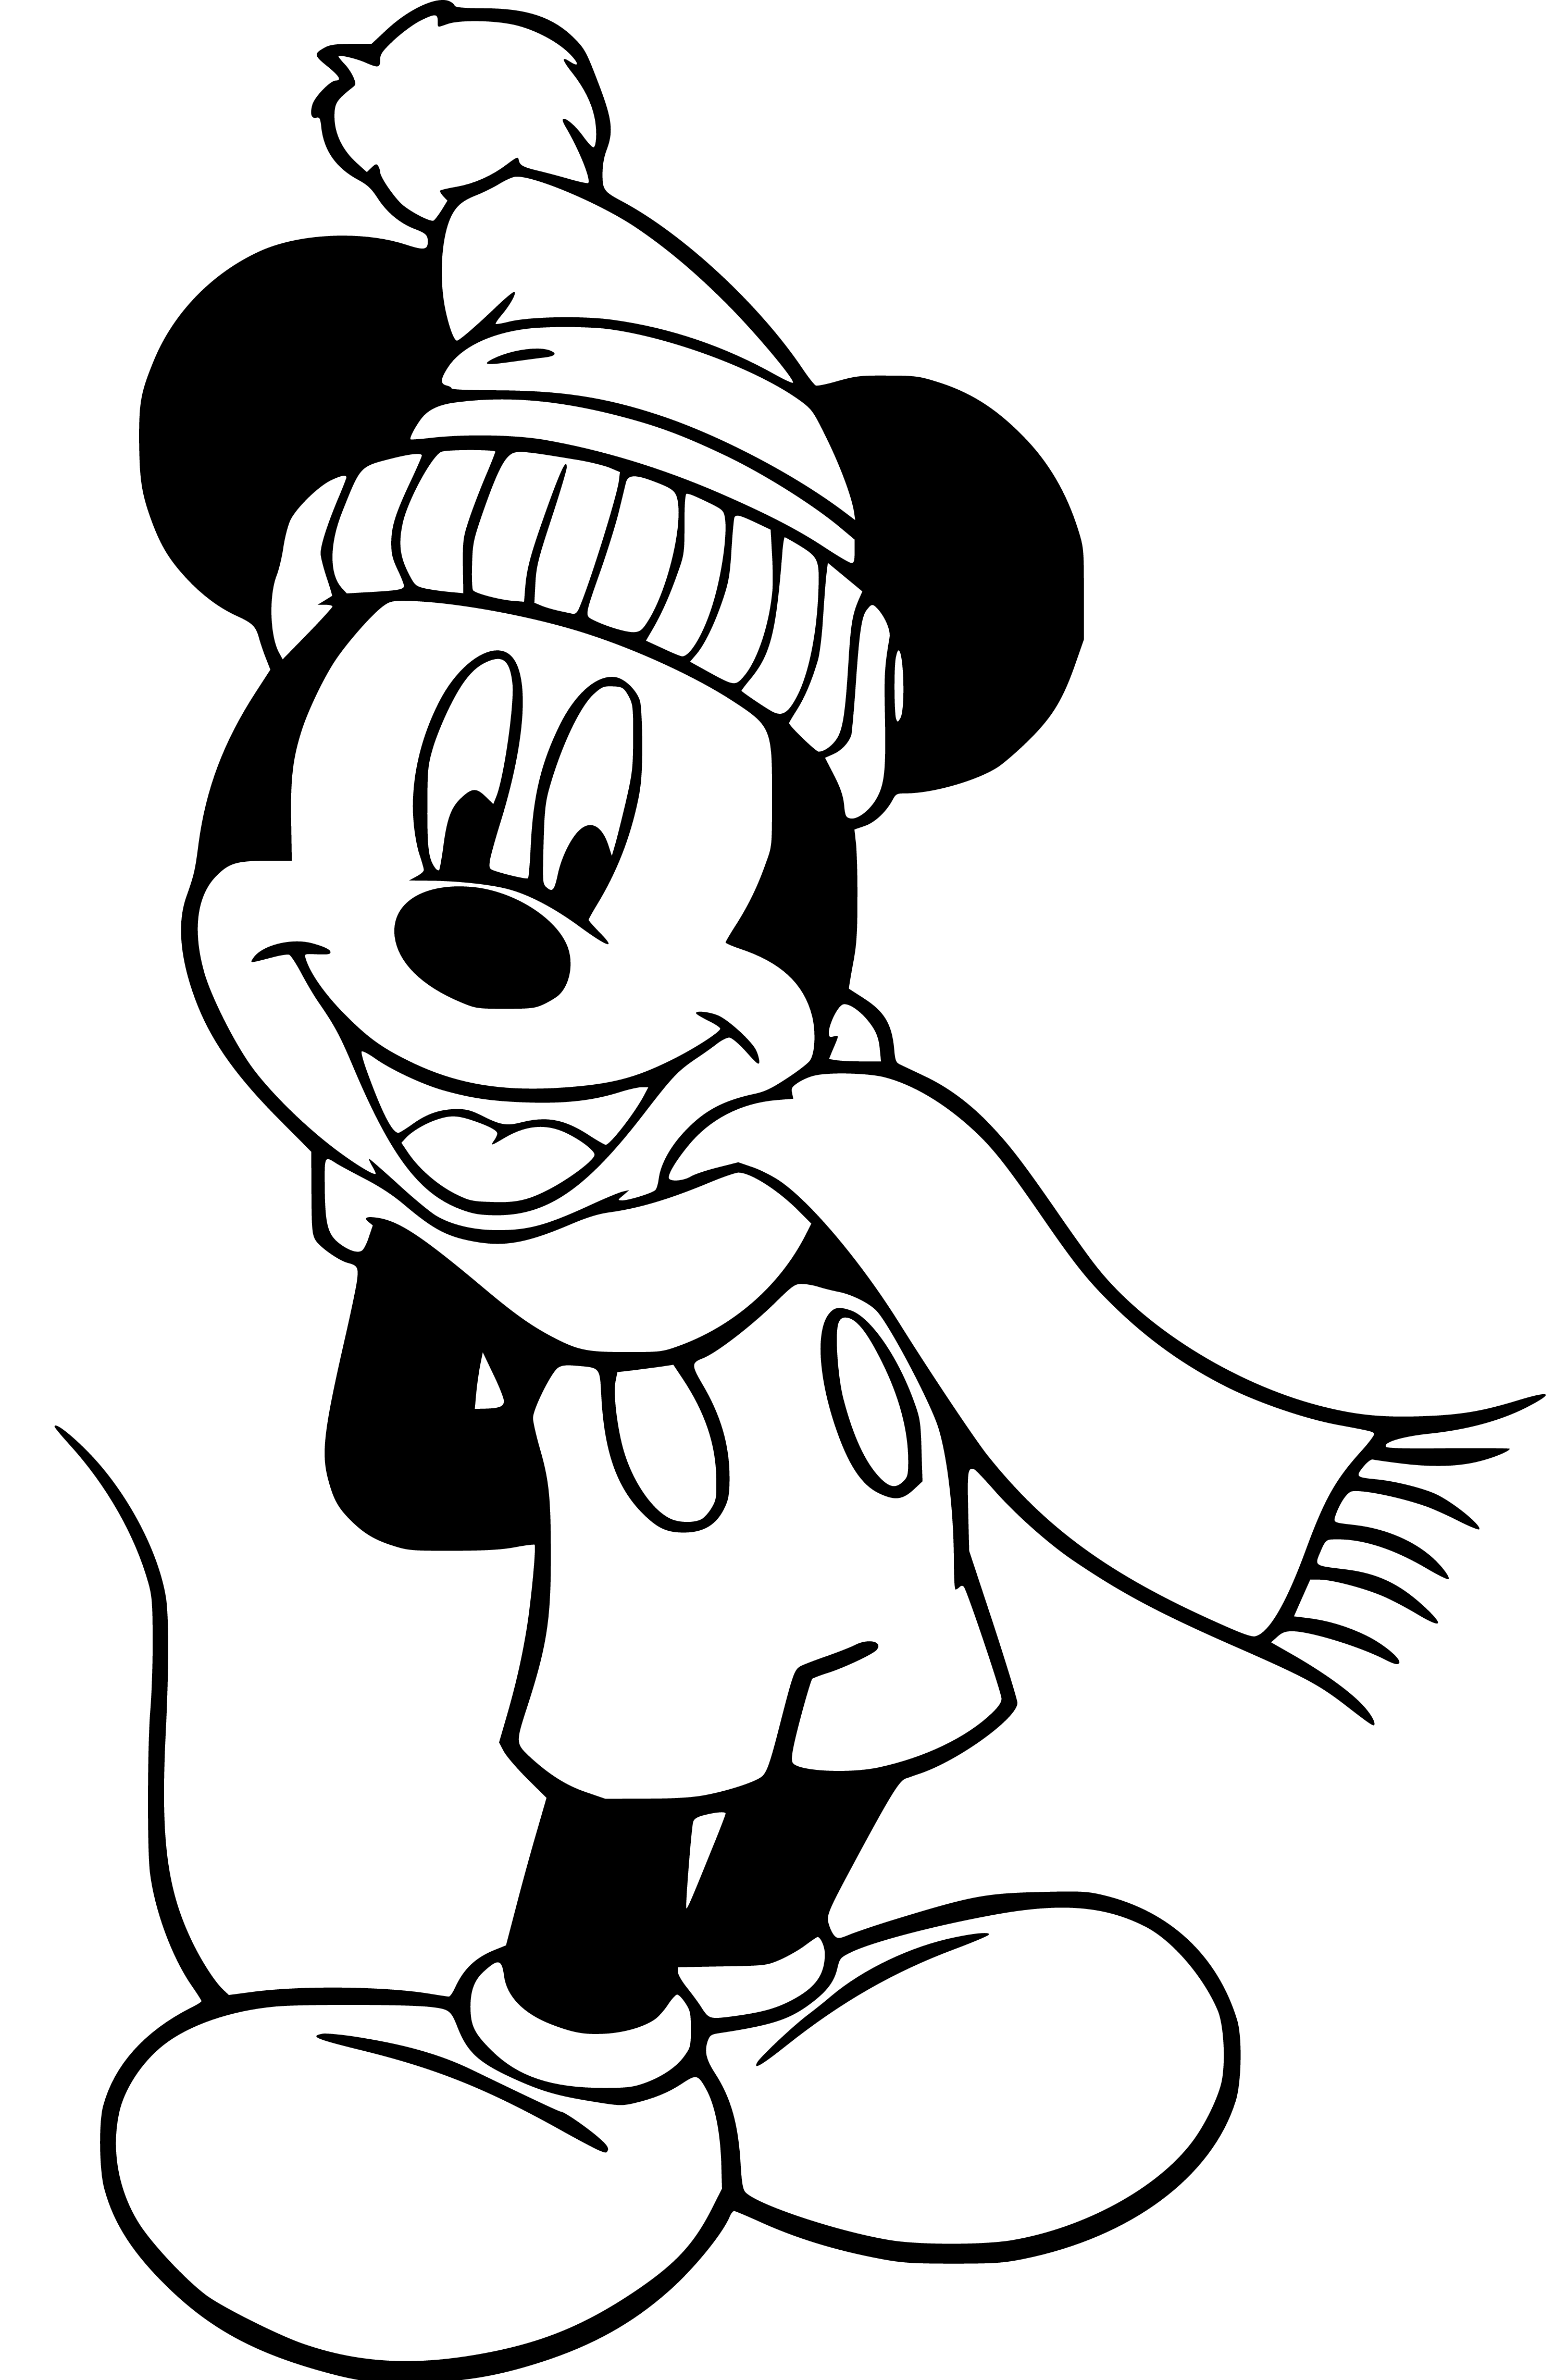 Mickey Mouse Christmas Hat Coloring Page for Kids - SheetalColor.com